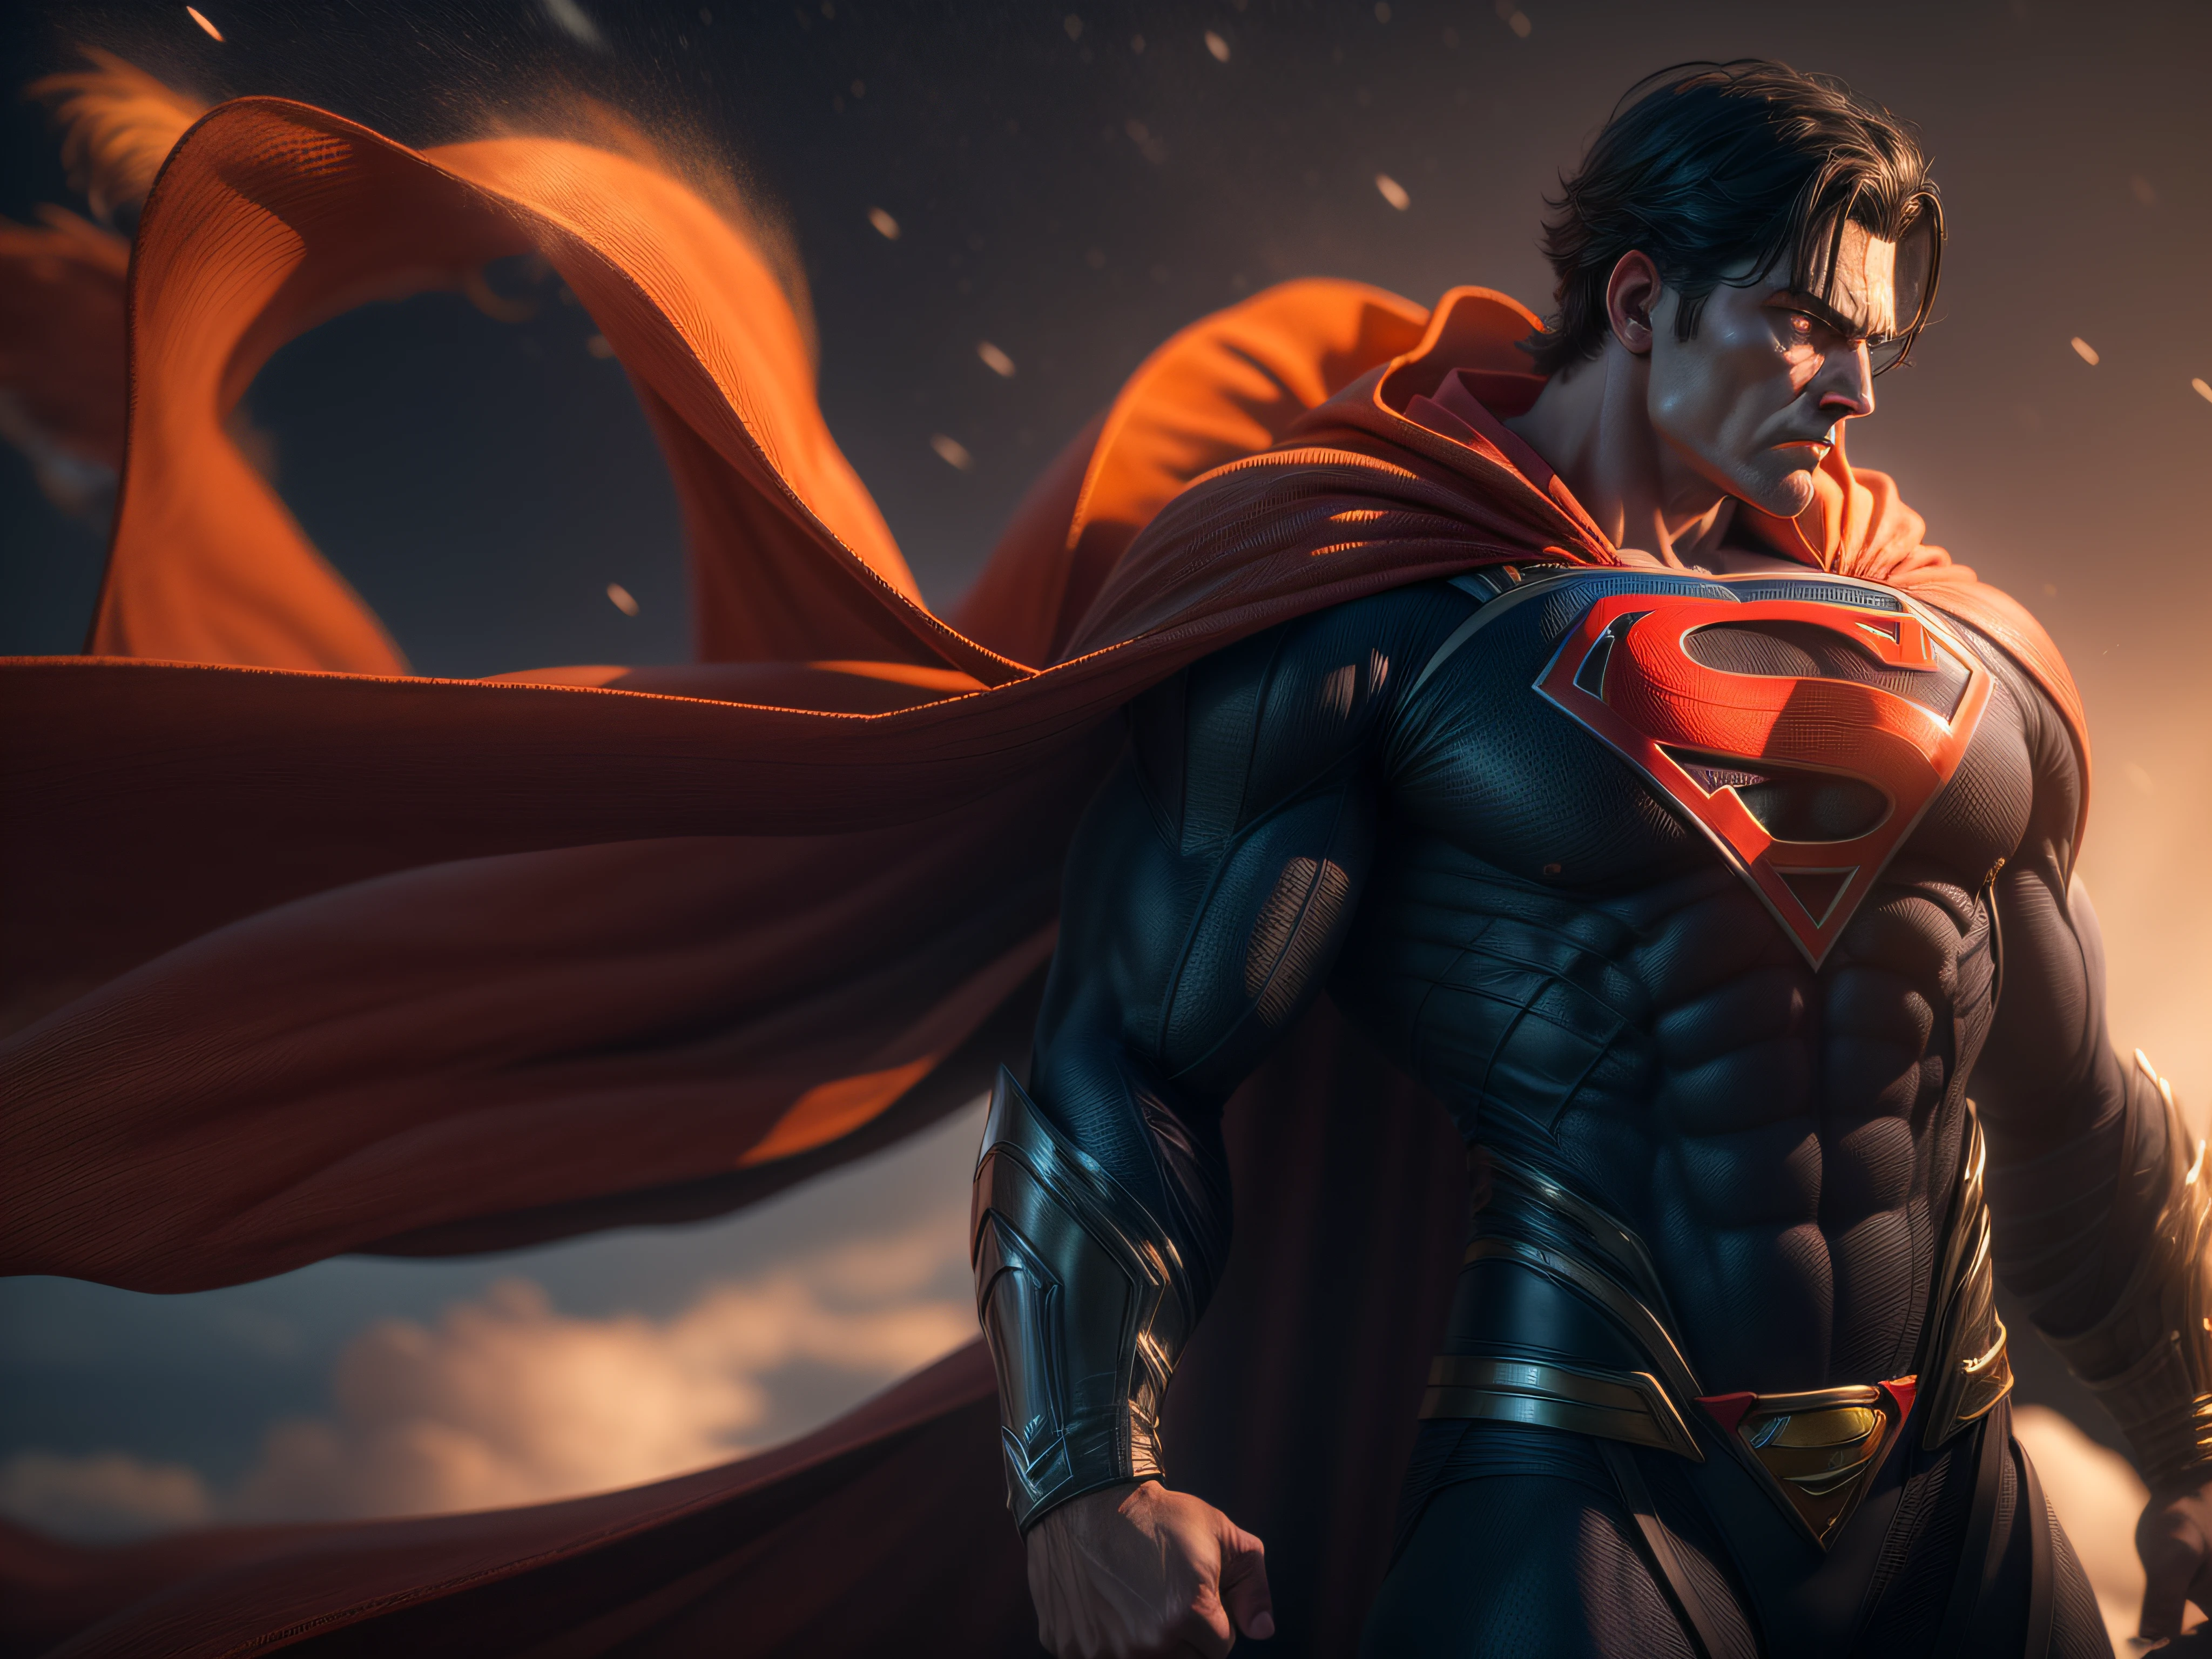 Close a powerful threat, The imposing appearance of the mighty Superman dressed in orange uniform, menacing stare, ricamente detalhado, Hiper realista, 3D-rendering, obra-prima, NVIDIA, RTX, ray-traced, Bokeh, Night sky with a huge and beautiful full moon, estrelas brilhando, 8k,